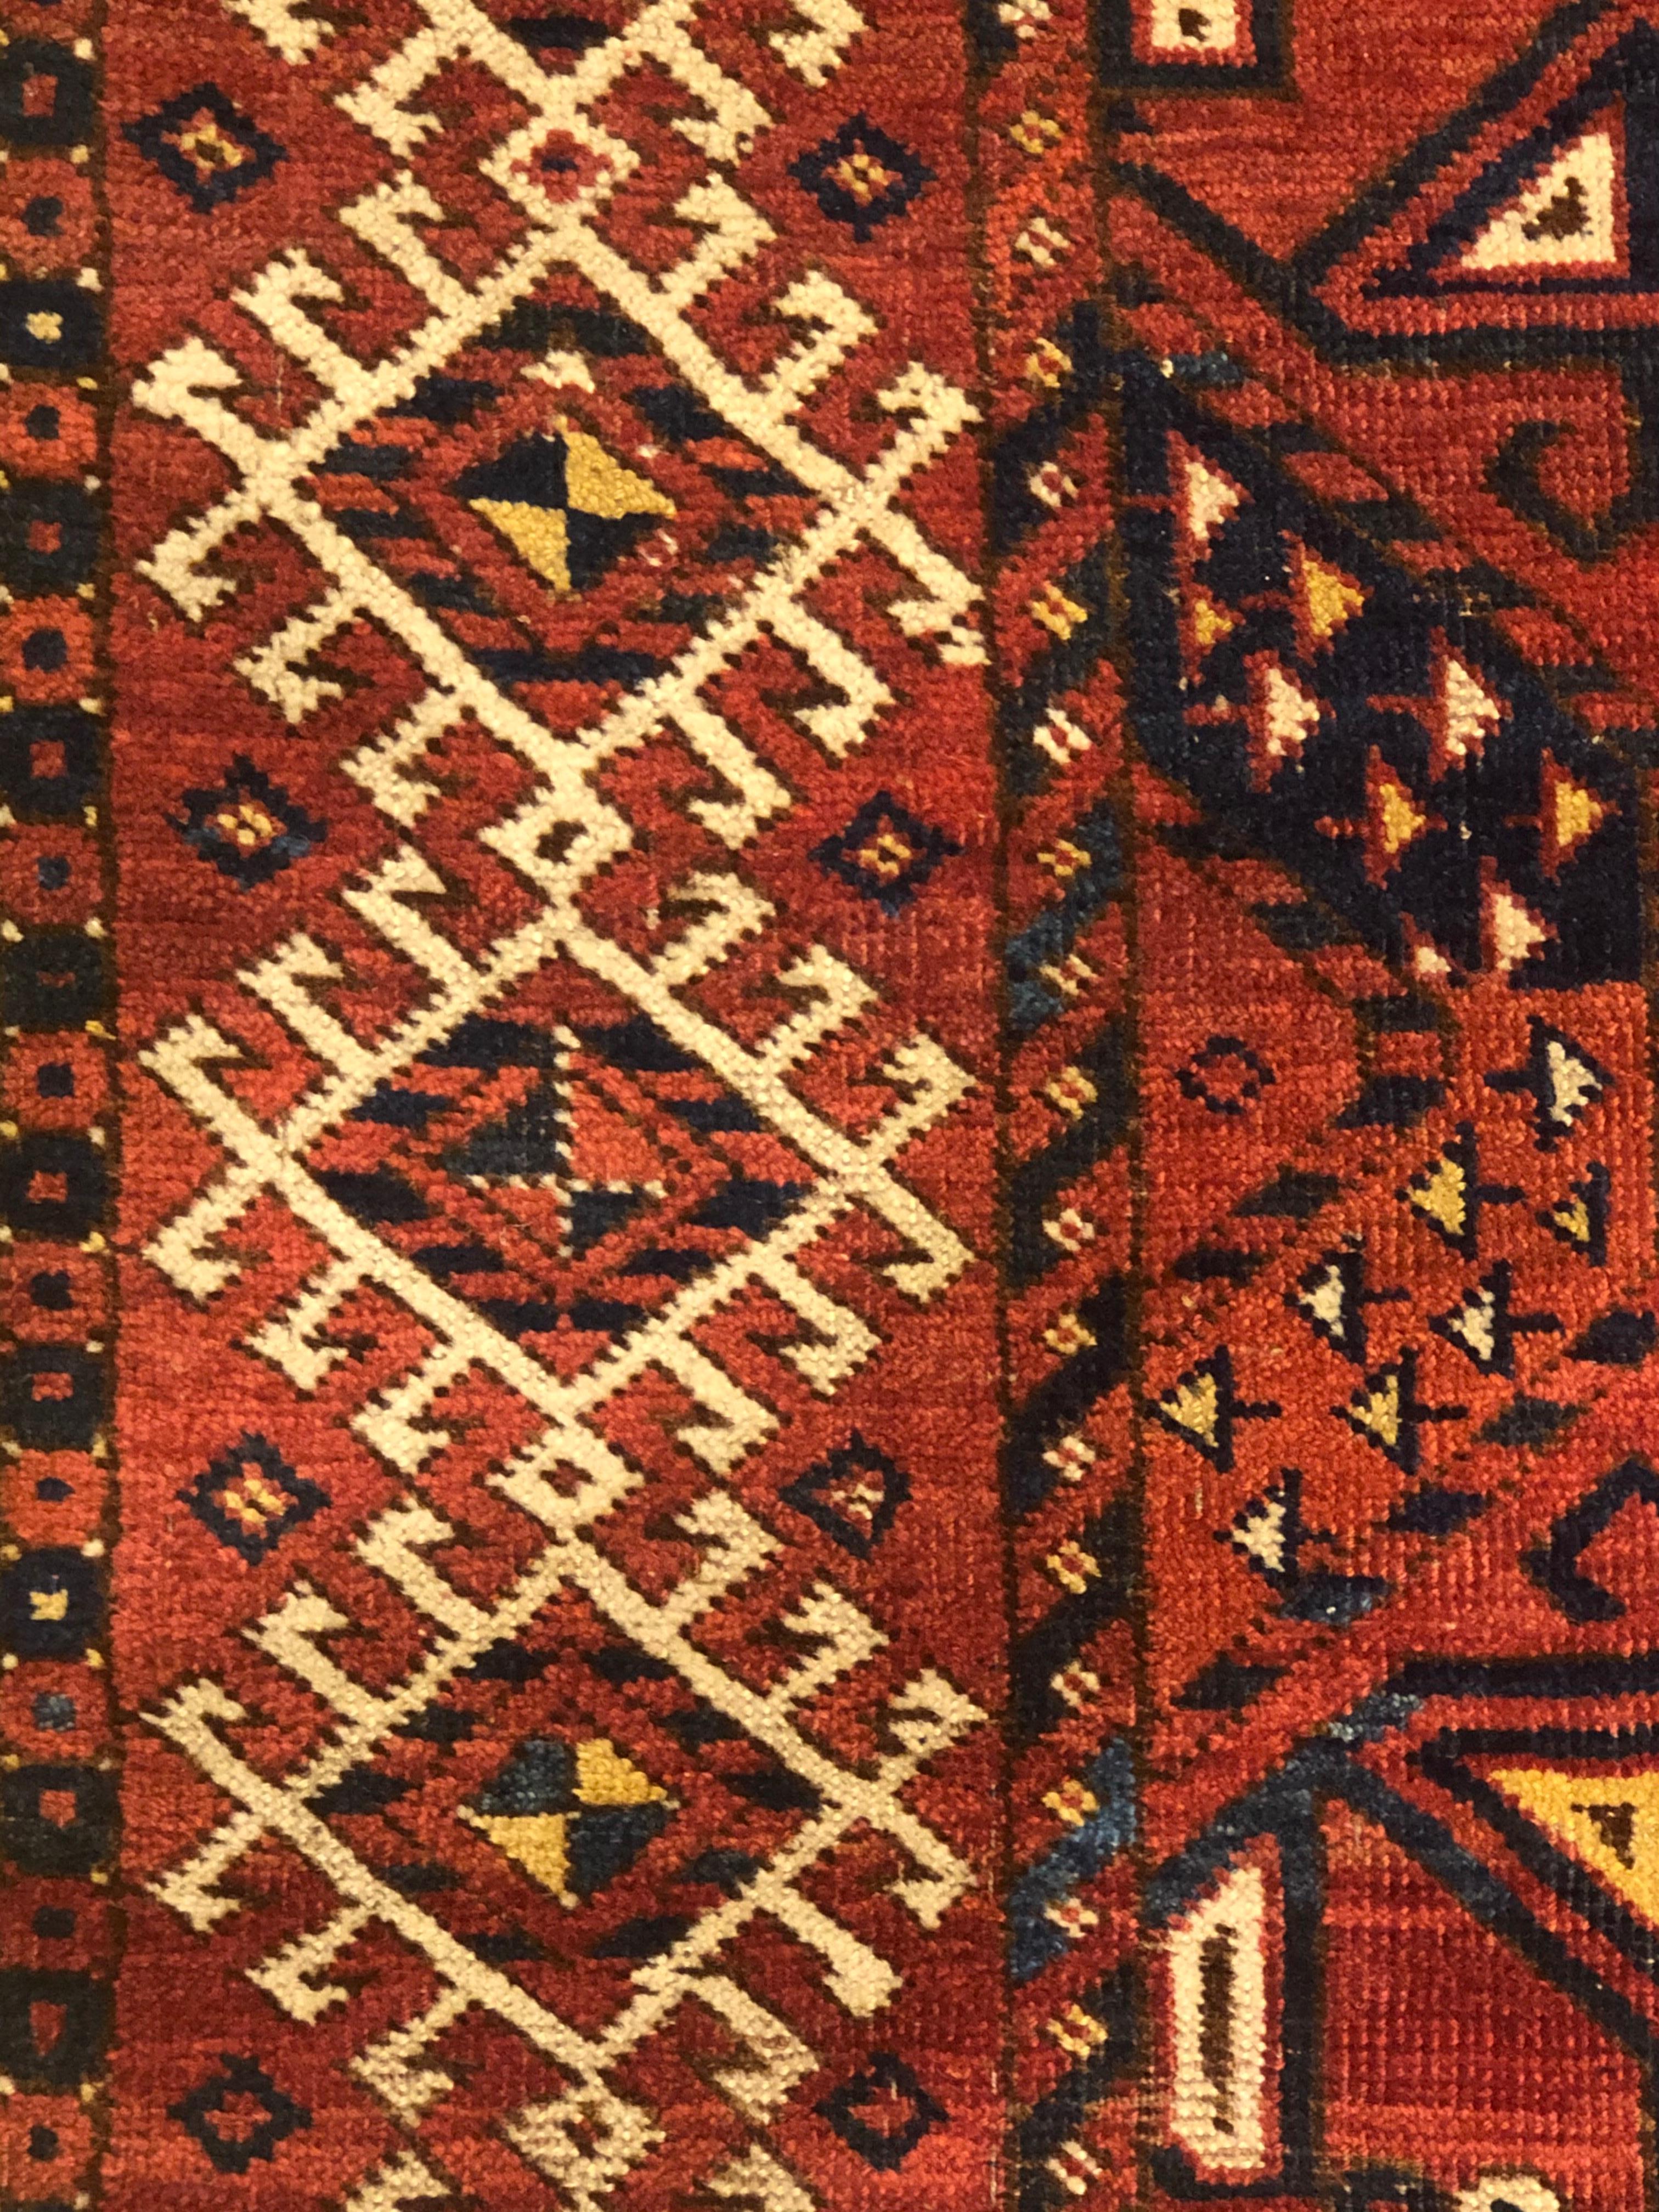 19th Century Red Blue White Geometric Archaic Polygonal Turkmen Rug, about 1870 For Sale 5